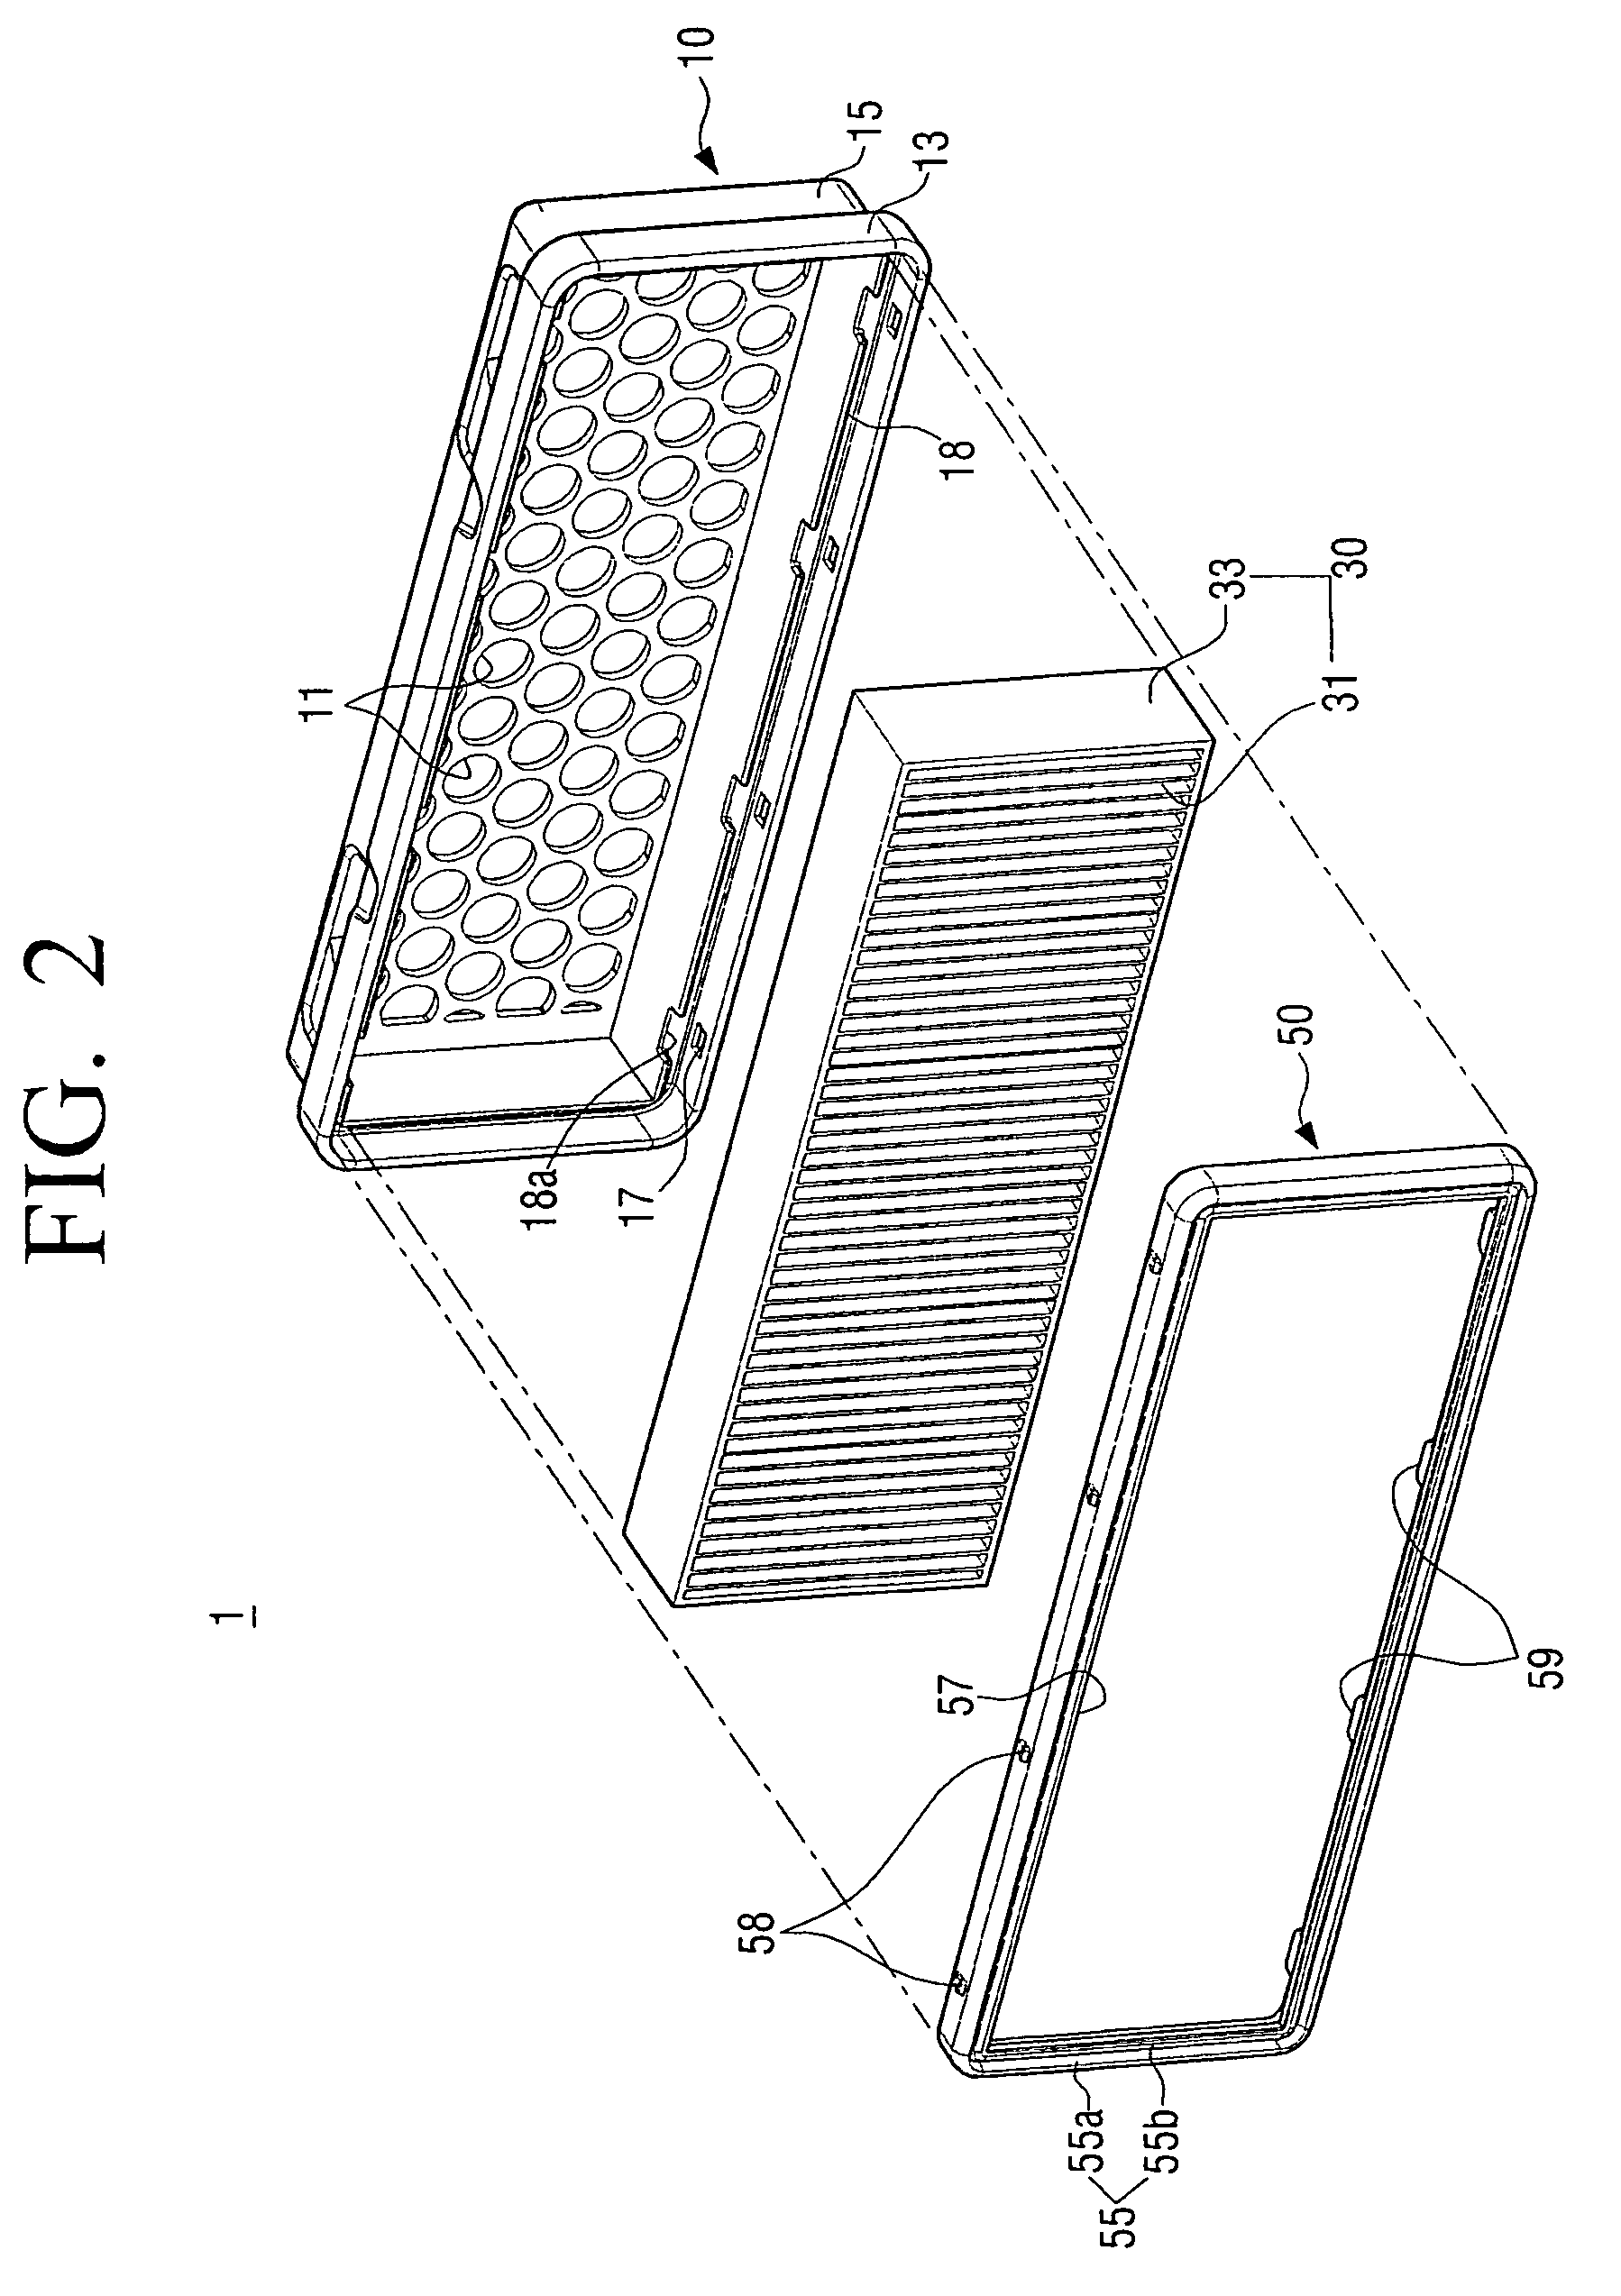 Filter assembly for vacuum cleaner